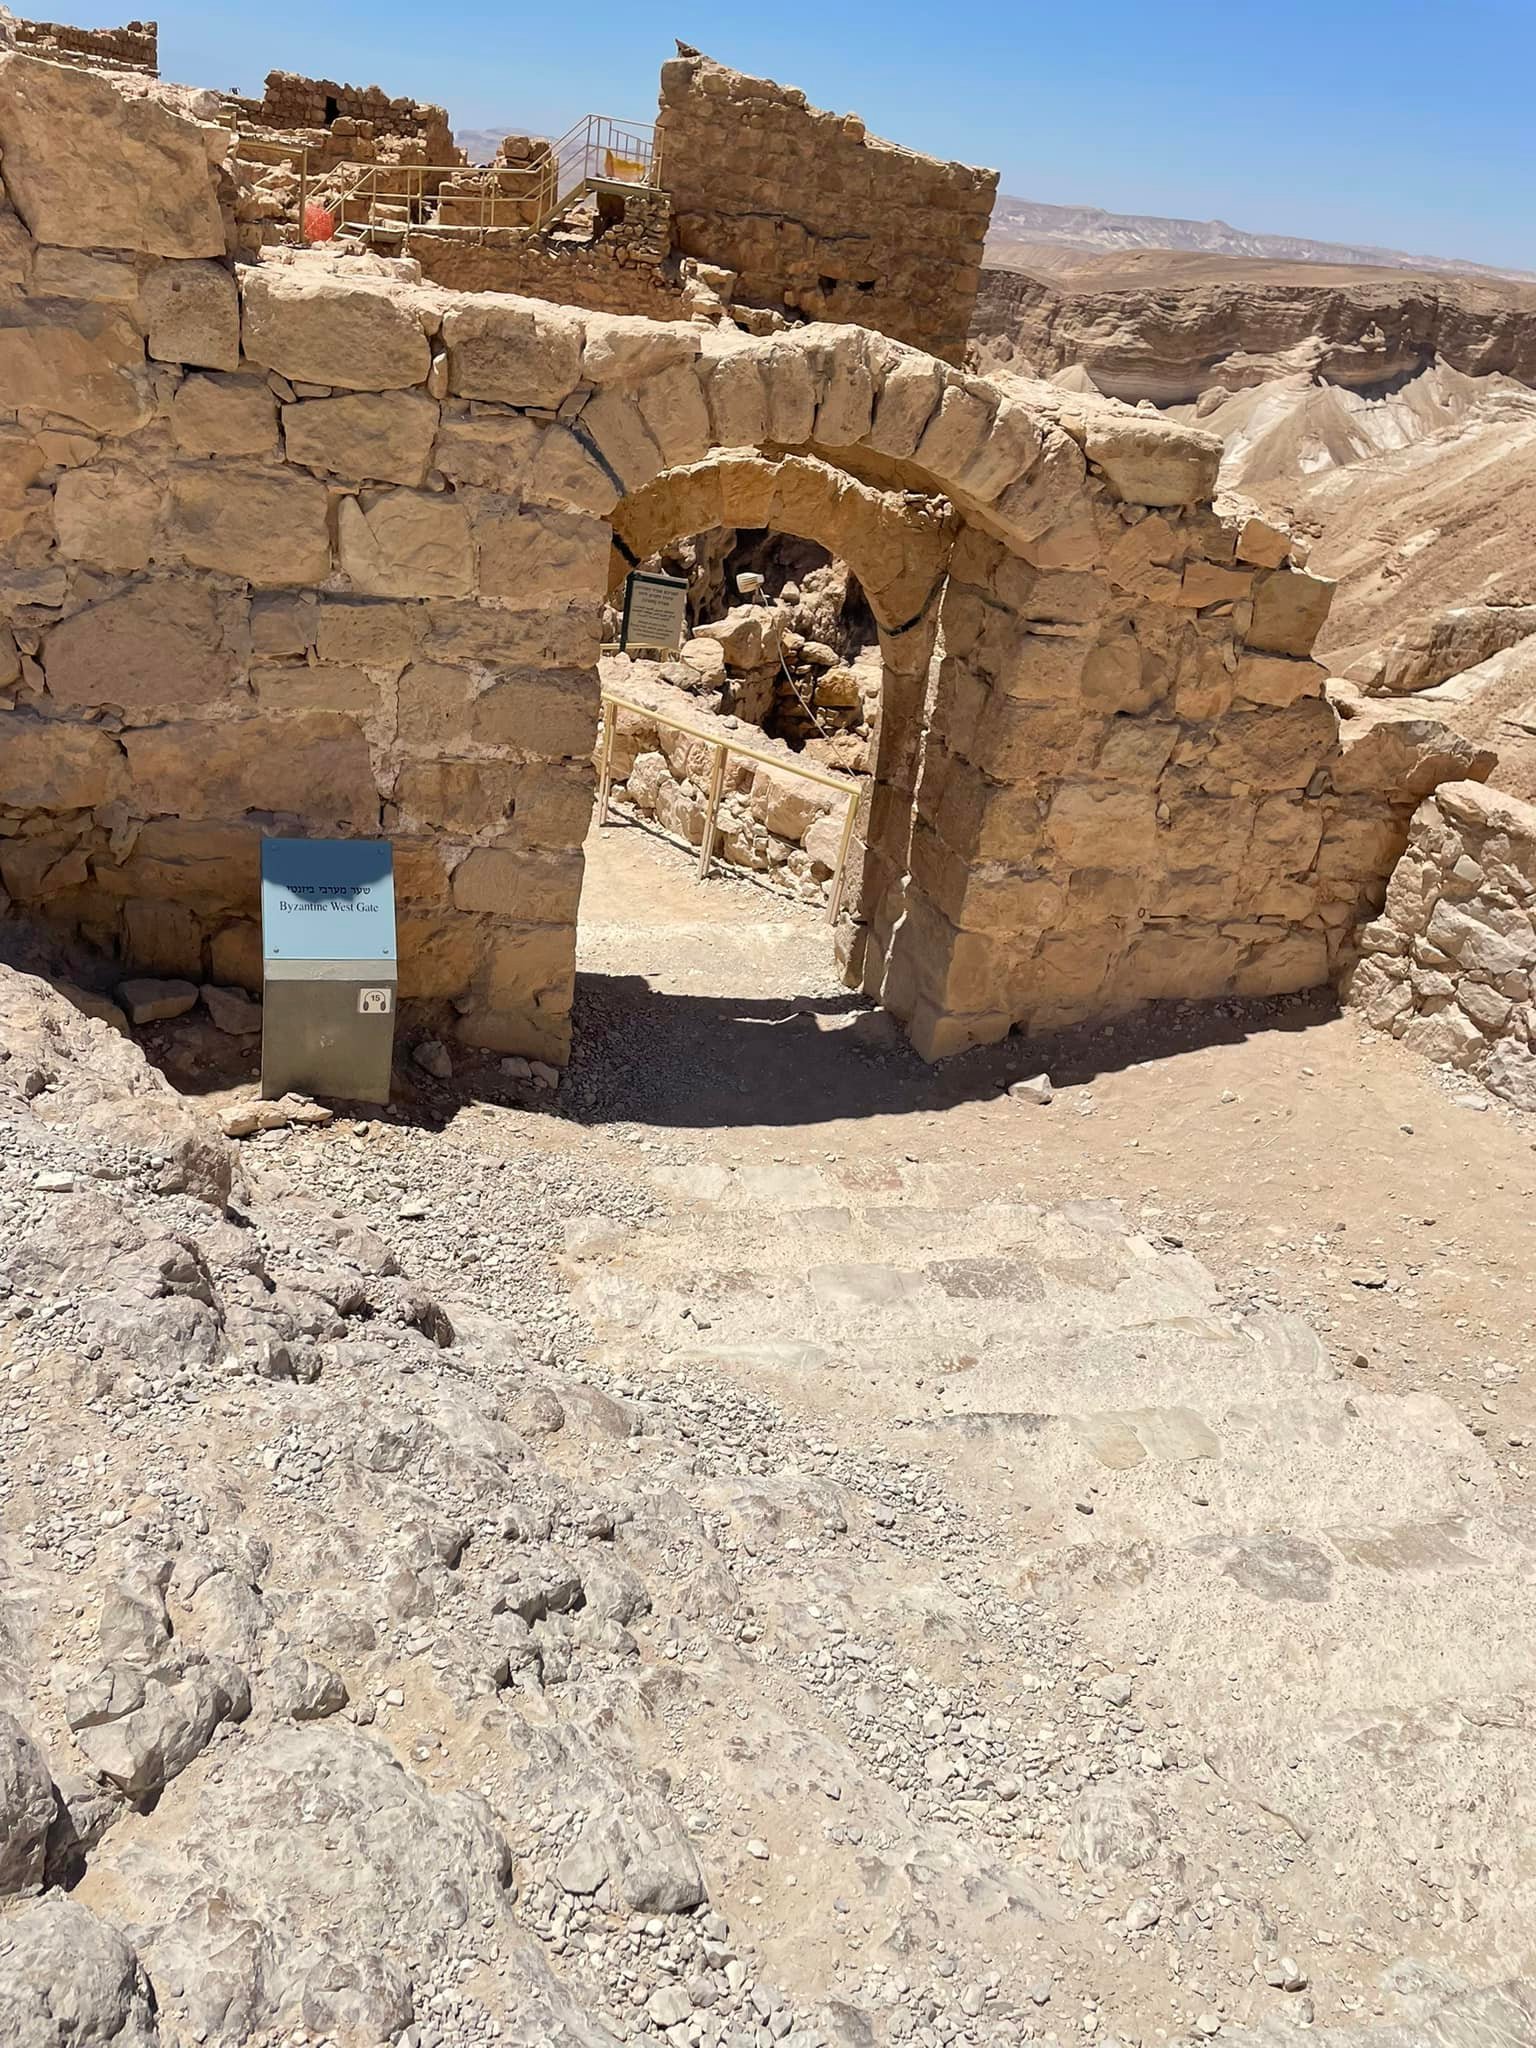  Masada was defeated in 73 a D. A few hundred years later, Byzantine monks built a monastery on top of Masada. This is the main entrance to that monastery compound. 